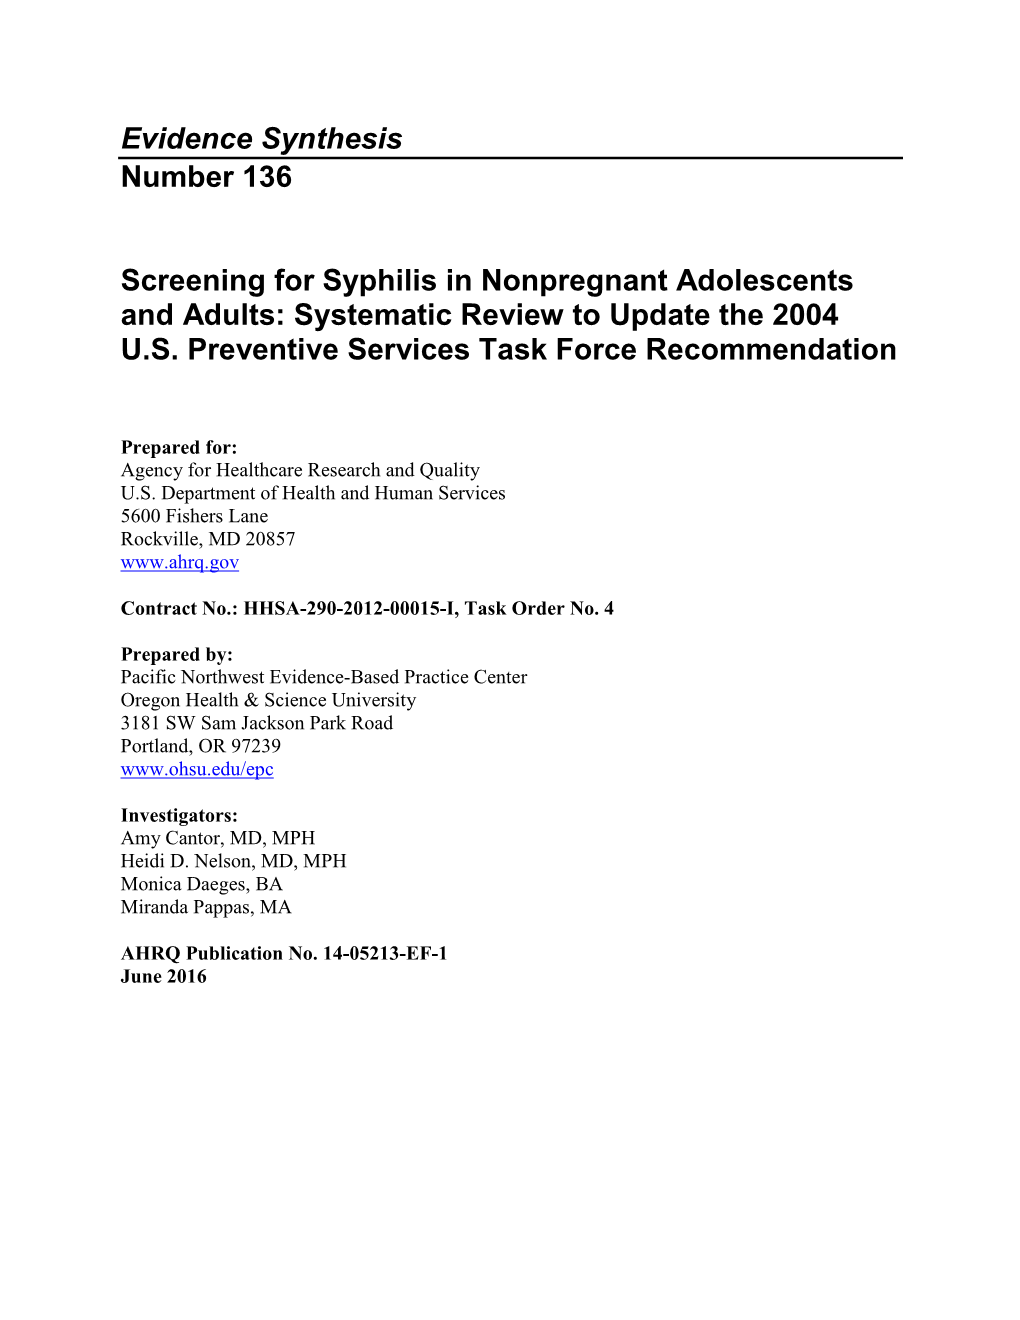 Screening for Syphilis in Nonpregnant Adolescents and Adults: Systematic Review to Update the 2004 U.S